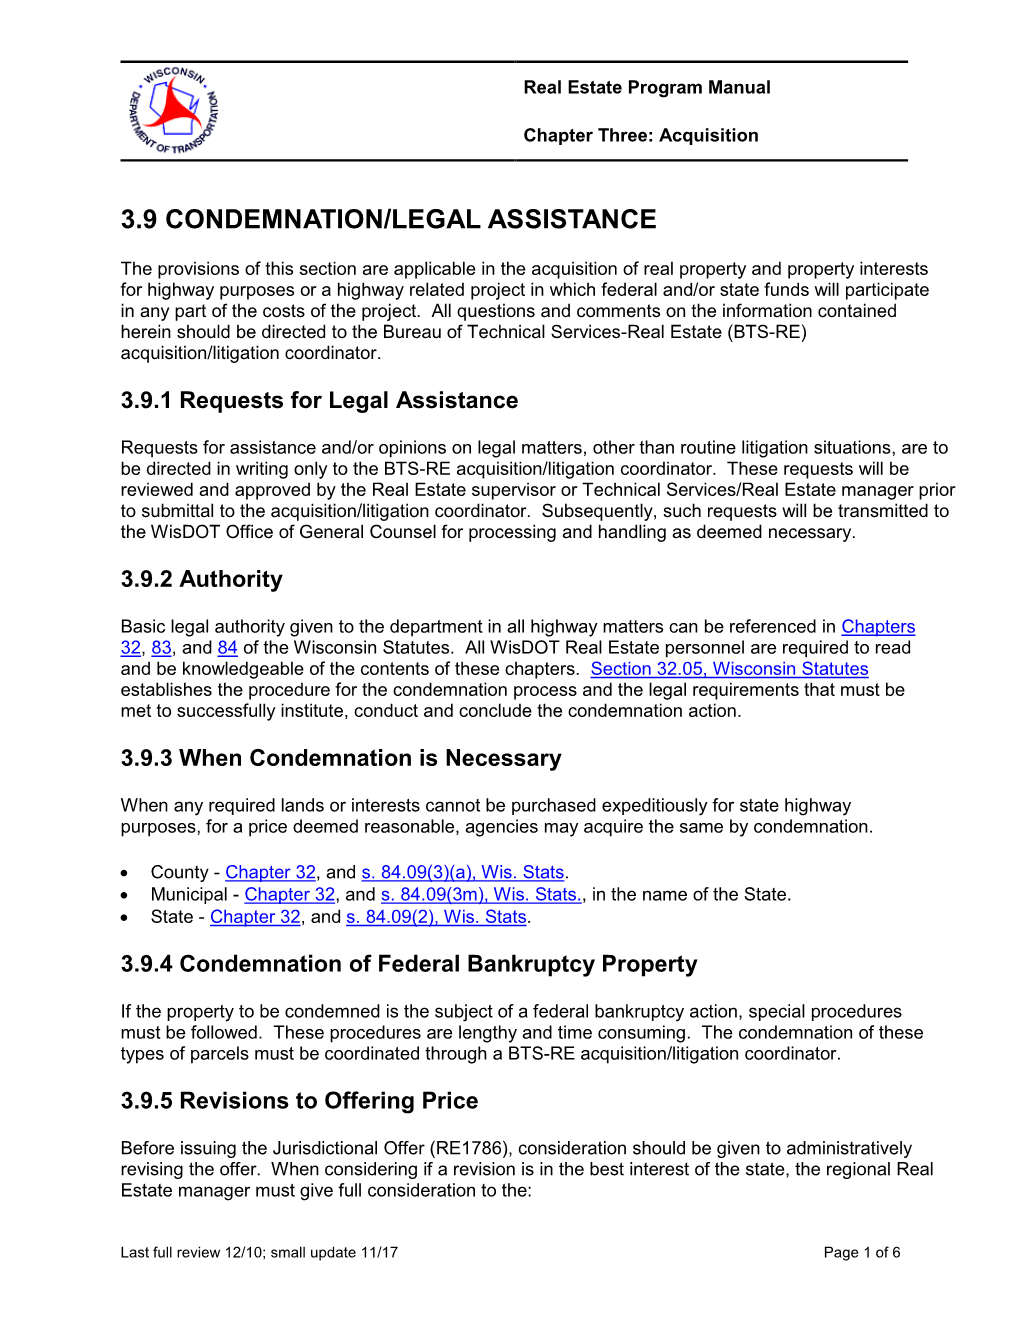 Section 3.9 Condemnation/Legal Assistance